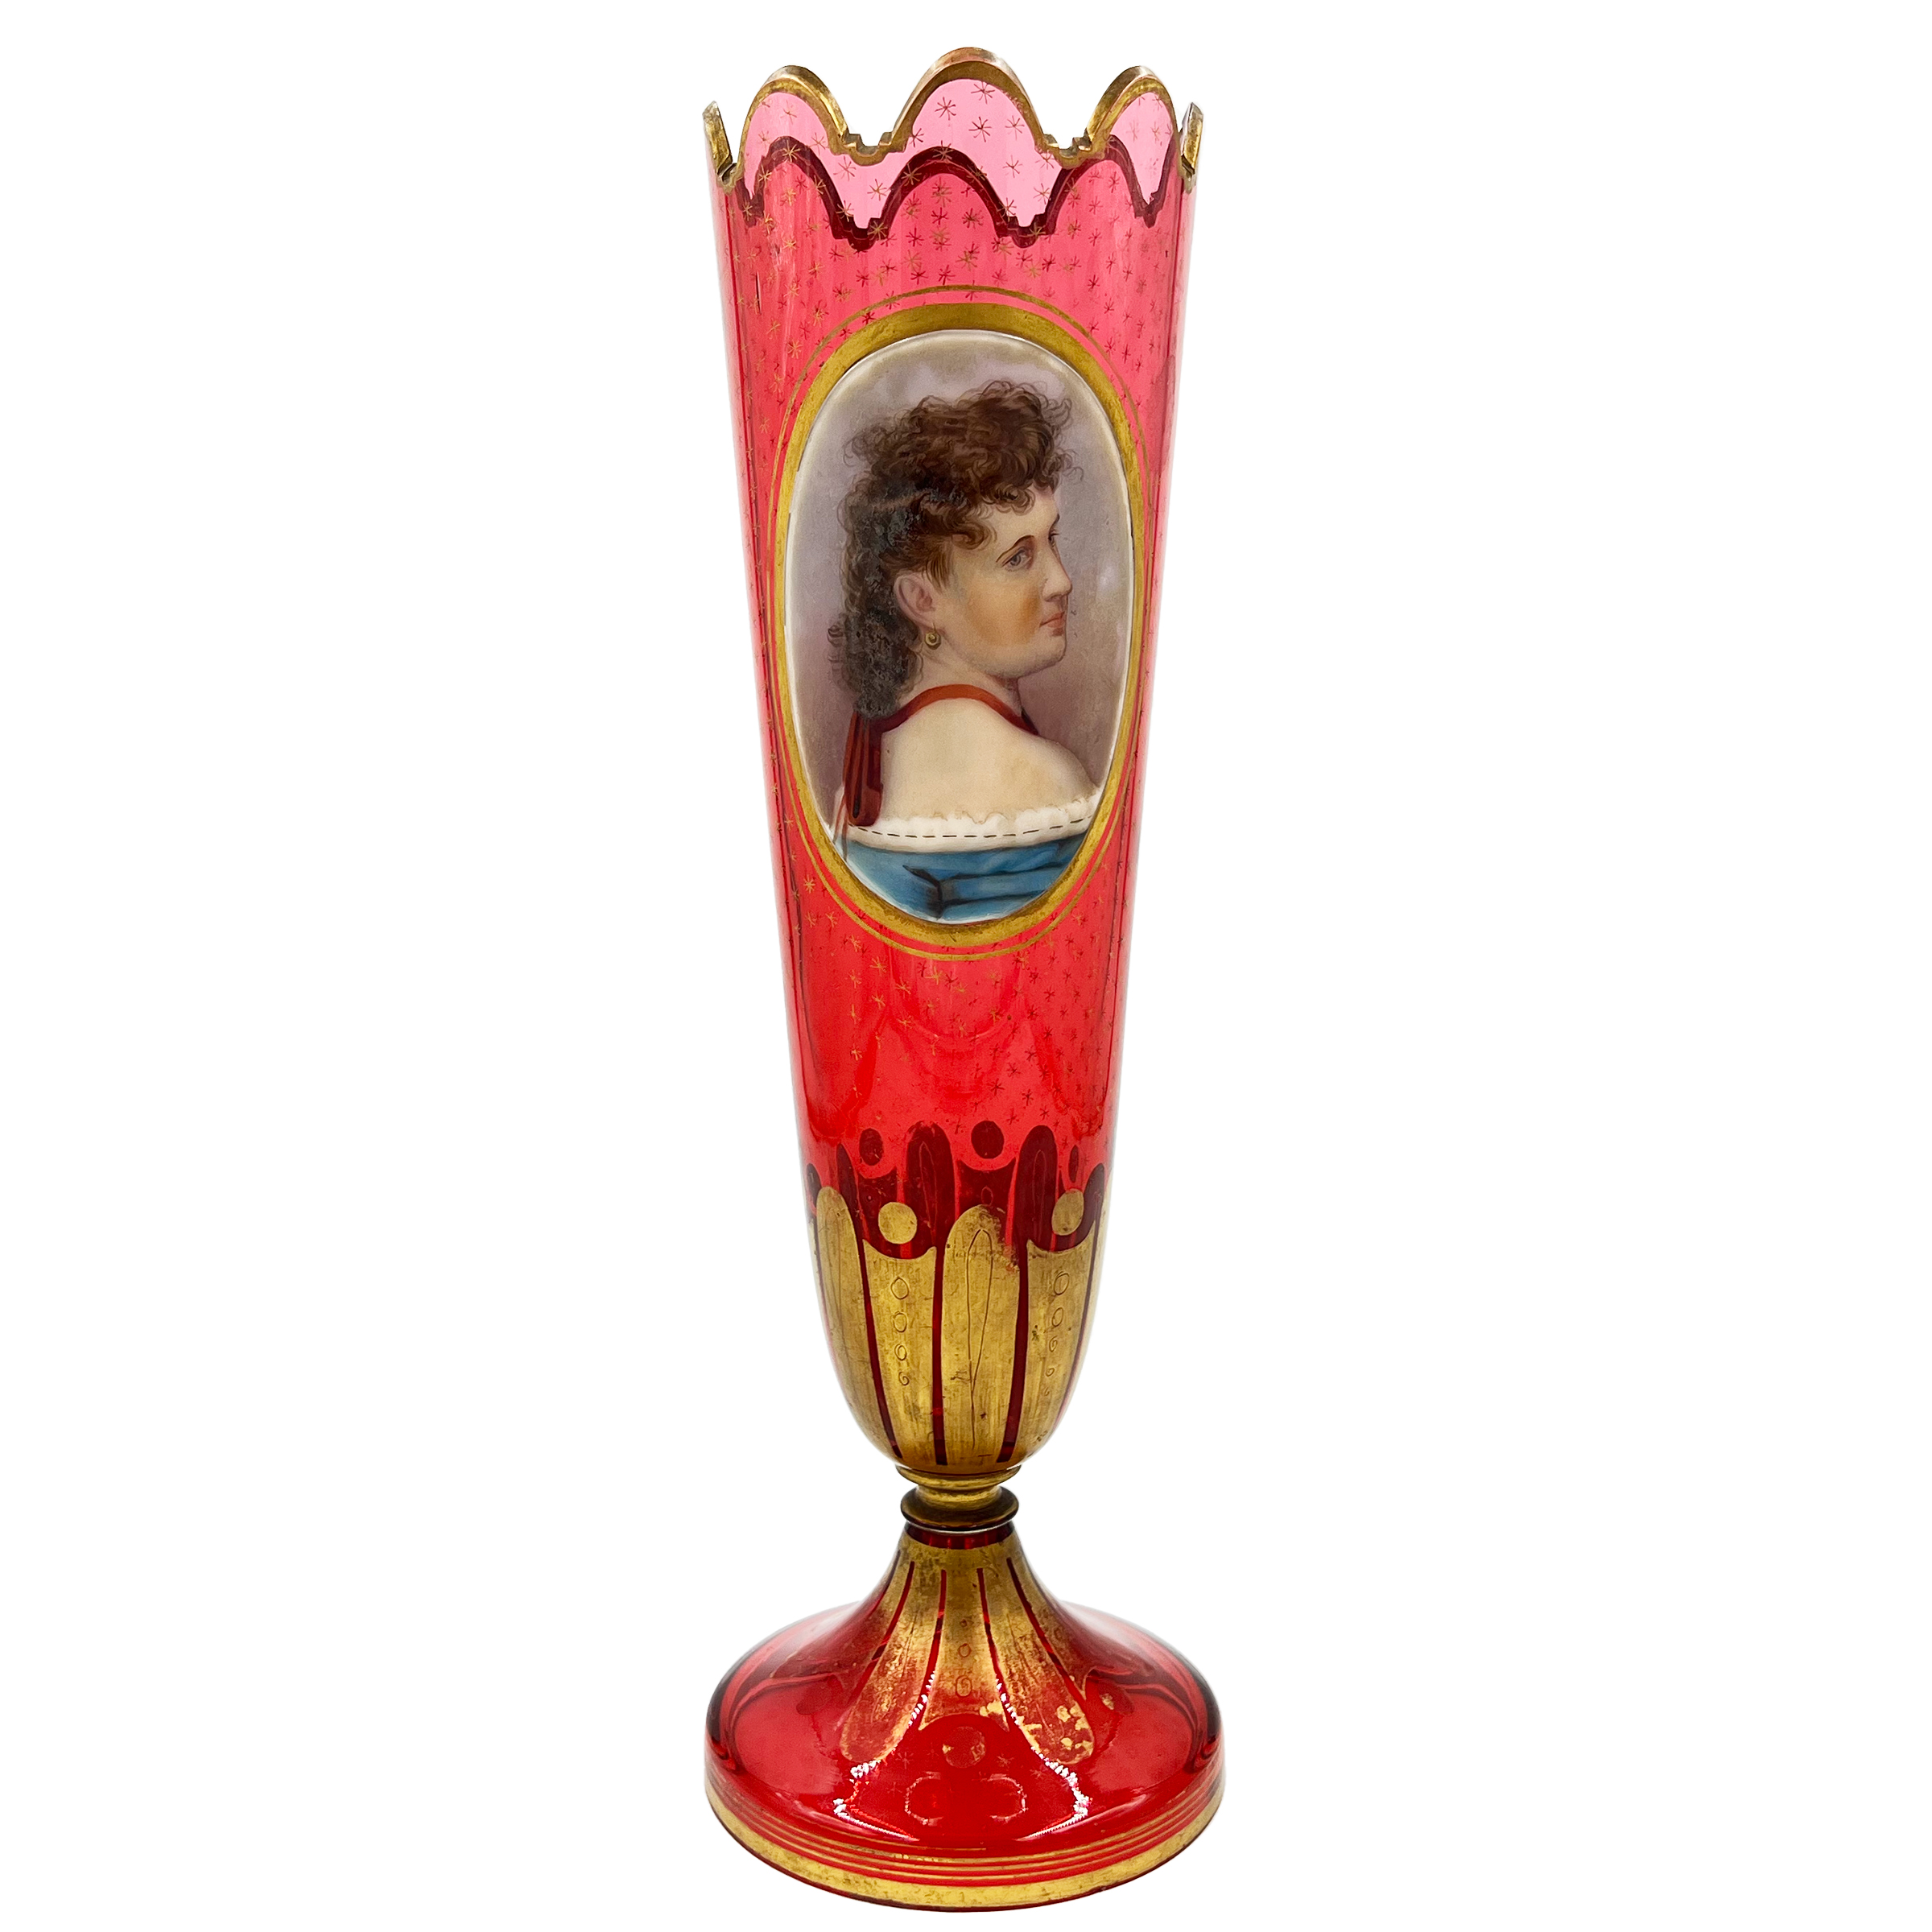 ROYAL RUBY – LARGE 19TH CENTURY BOHEMIAN GLASS VASE WITH GOLD GILDING